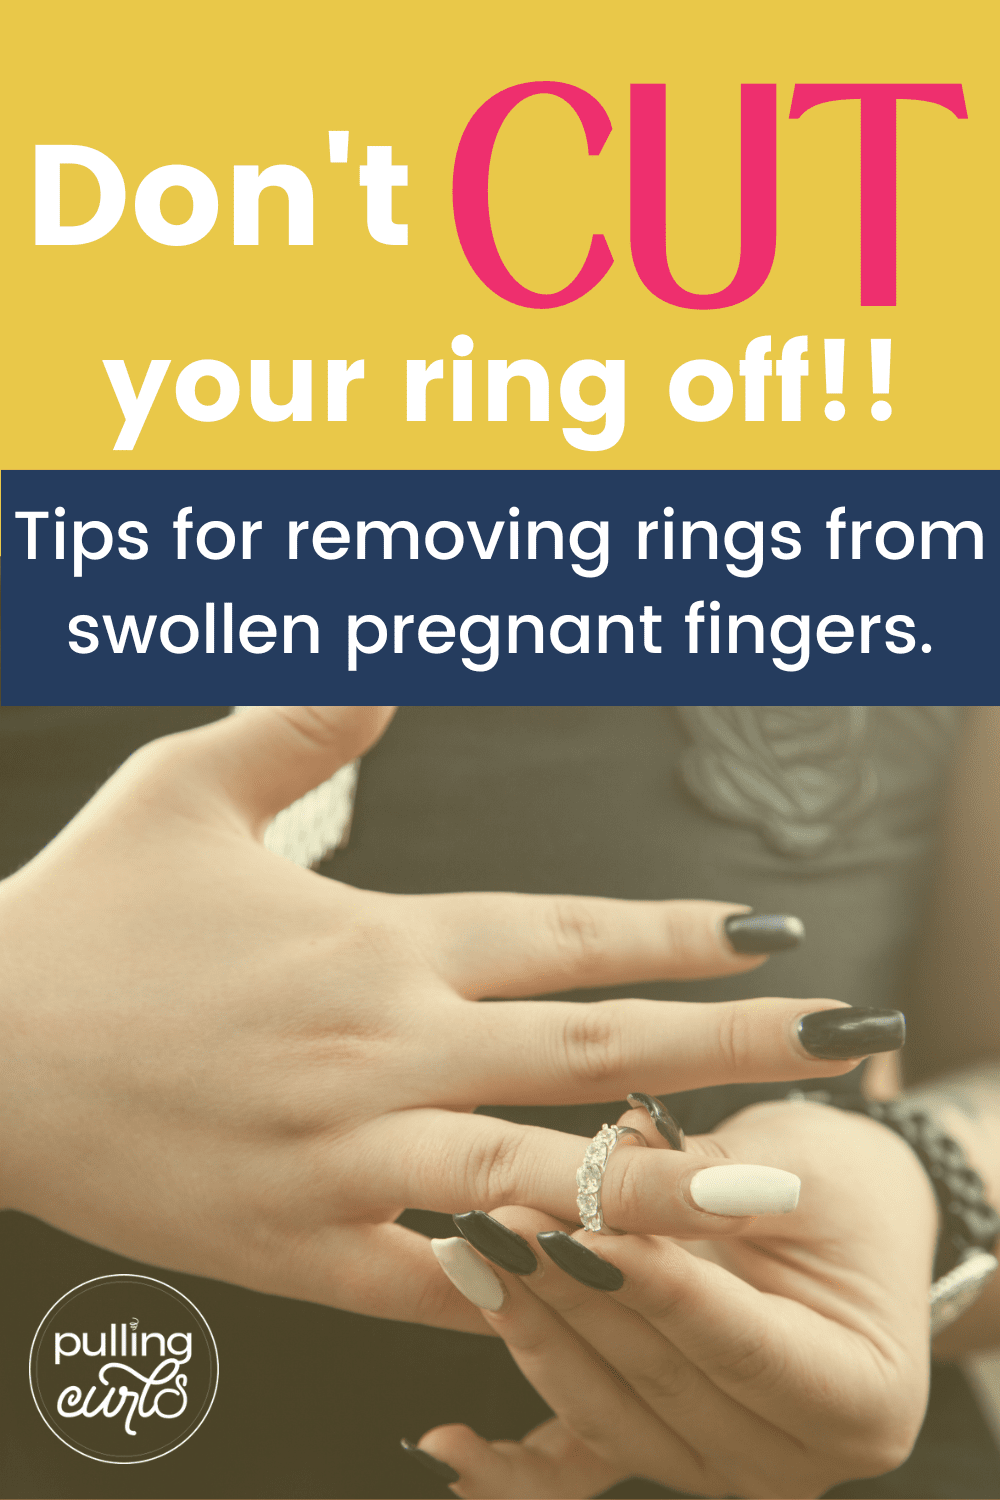 how to get a ring off swollen pregnant fingers. via @pullingcurls